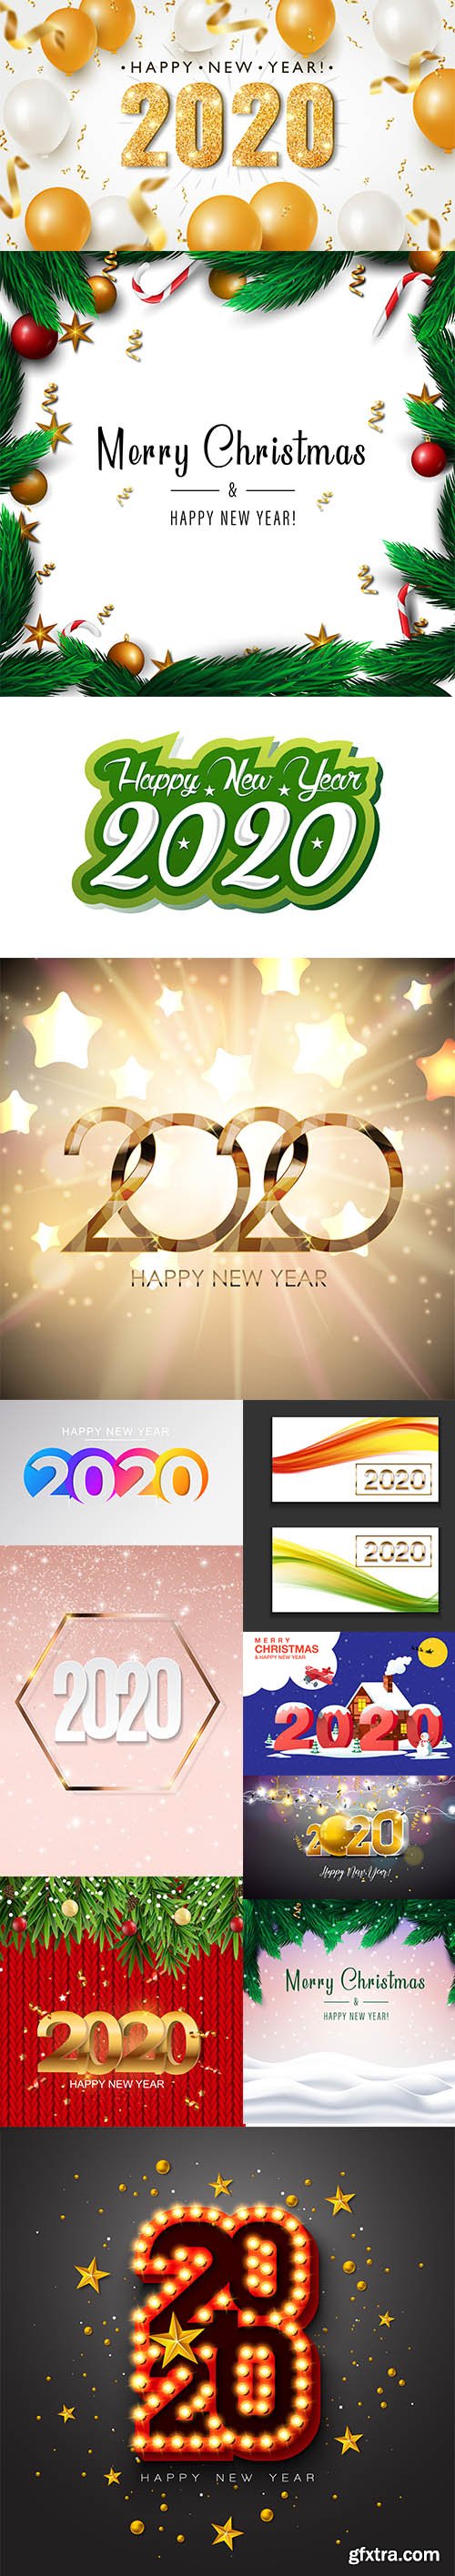 Merry Christmas and New Year 2020 Vector Illustrations Pack Vol 4